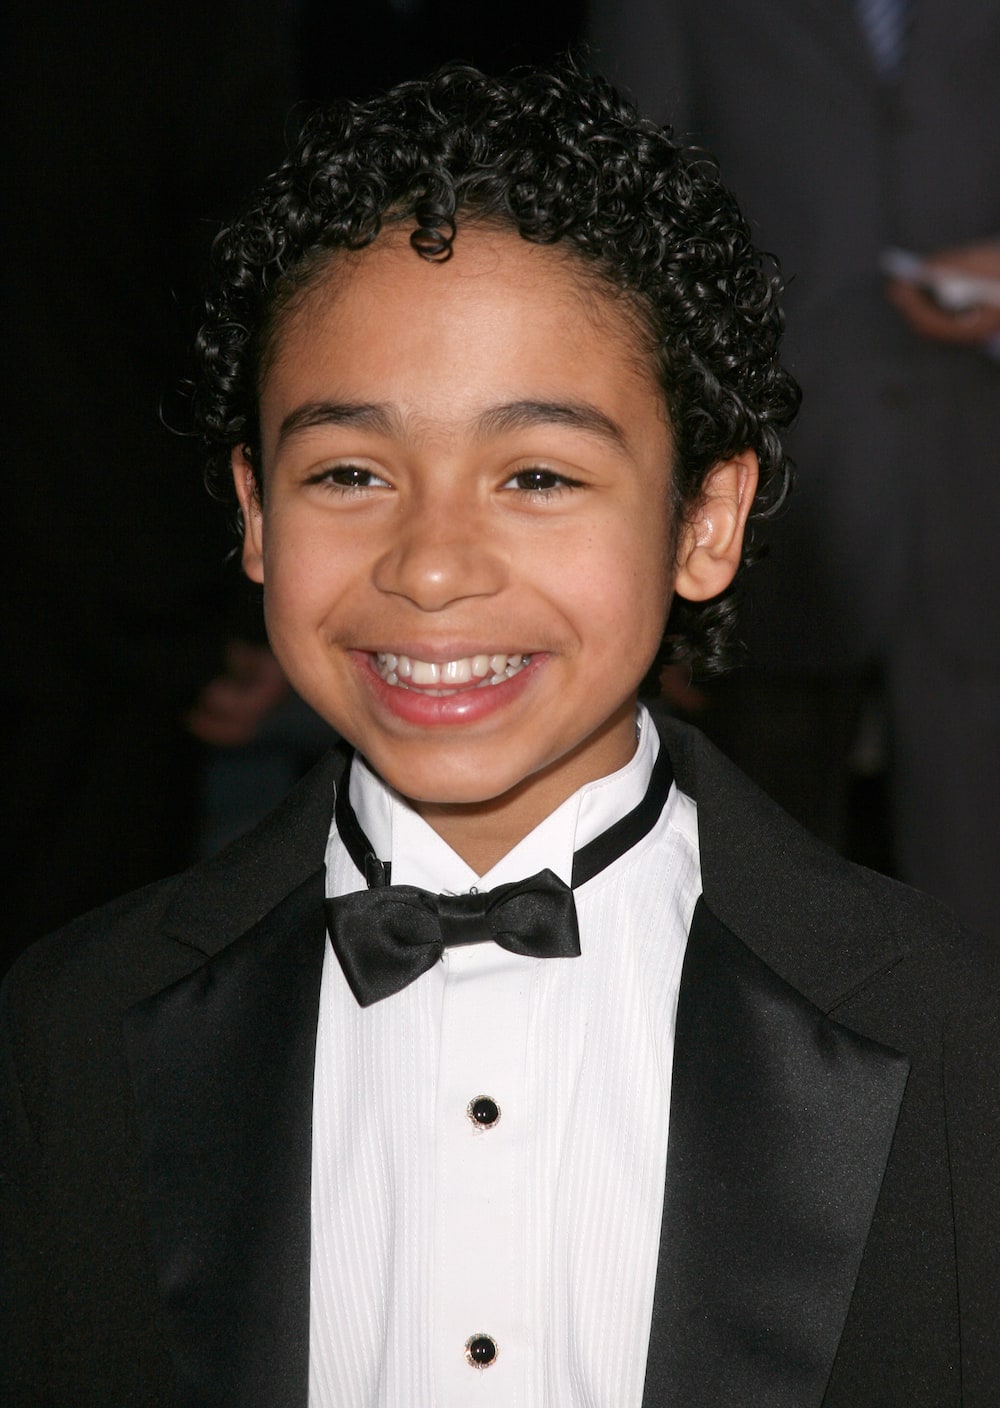 Franklin from My wife and kids